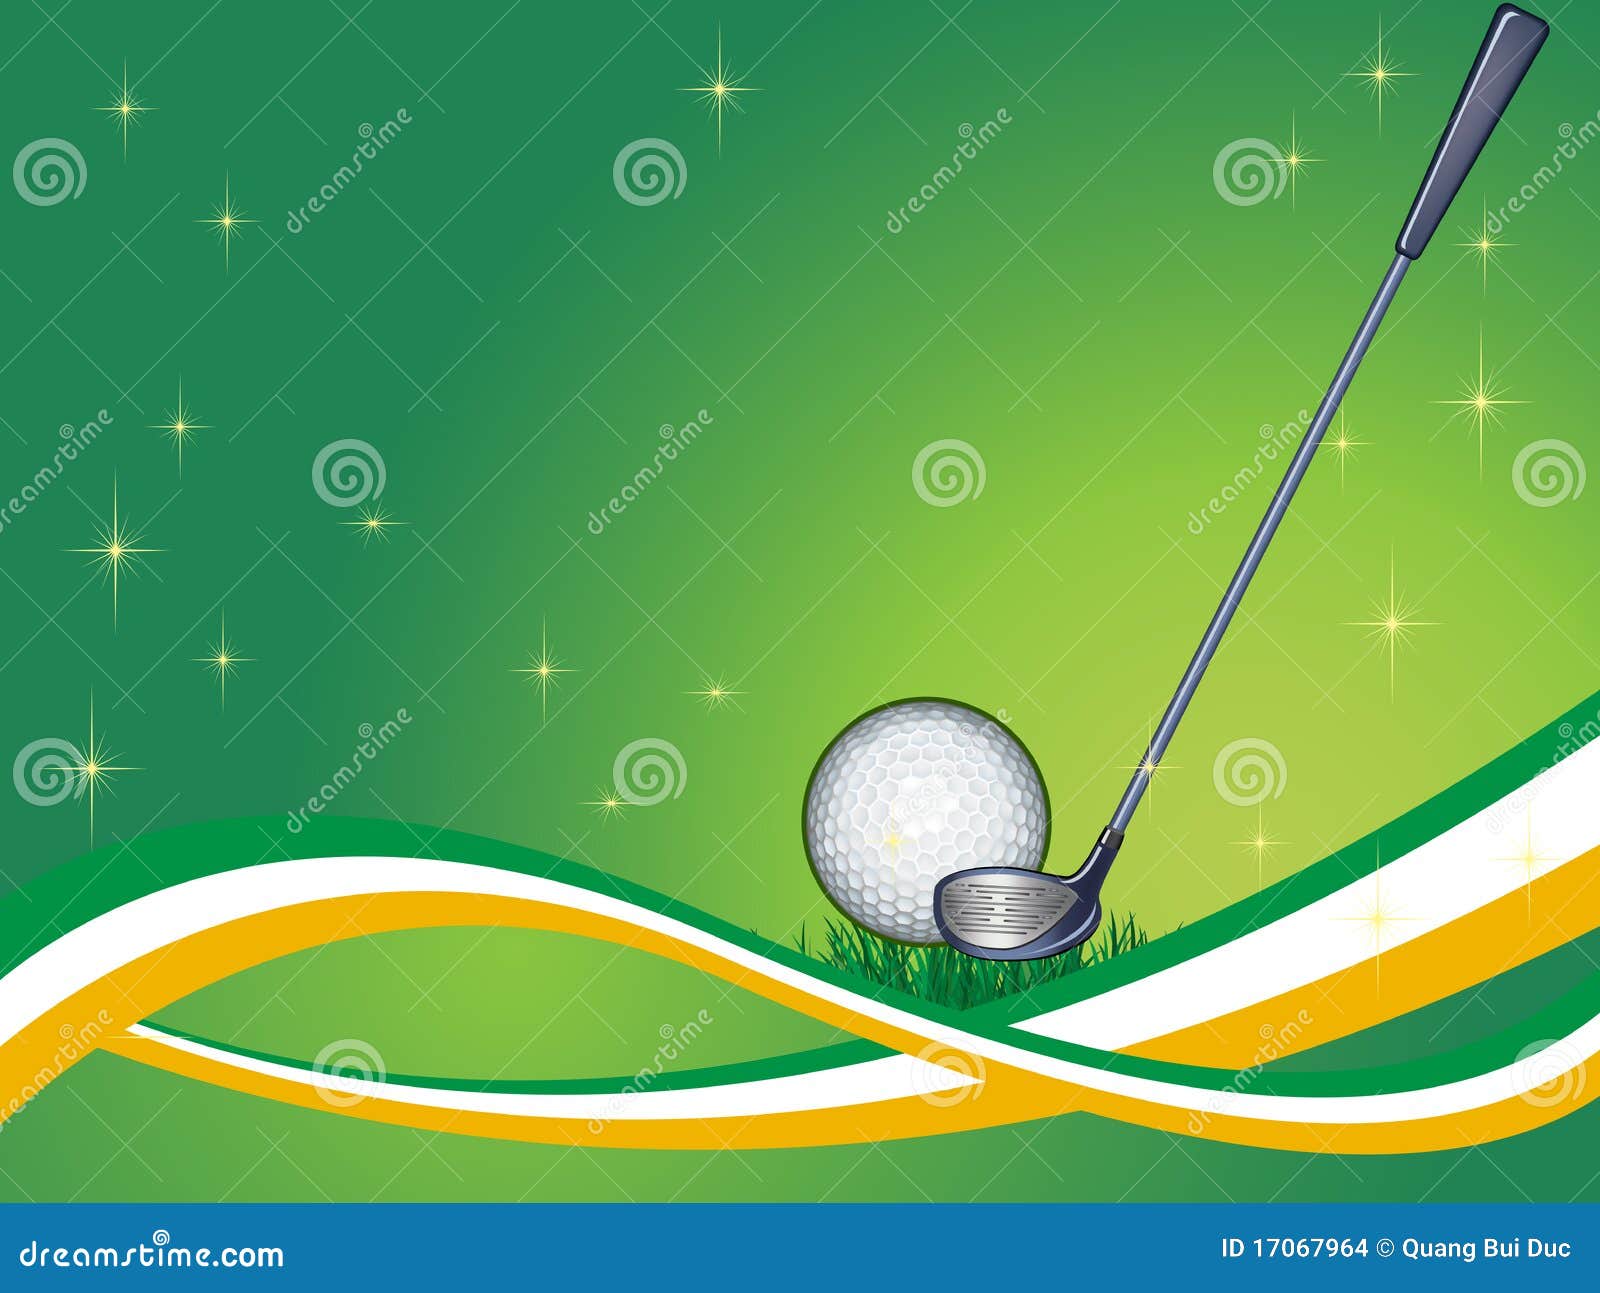 Abstract Golf Background stock vector. Illustration of goal - 17067964